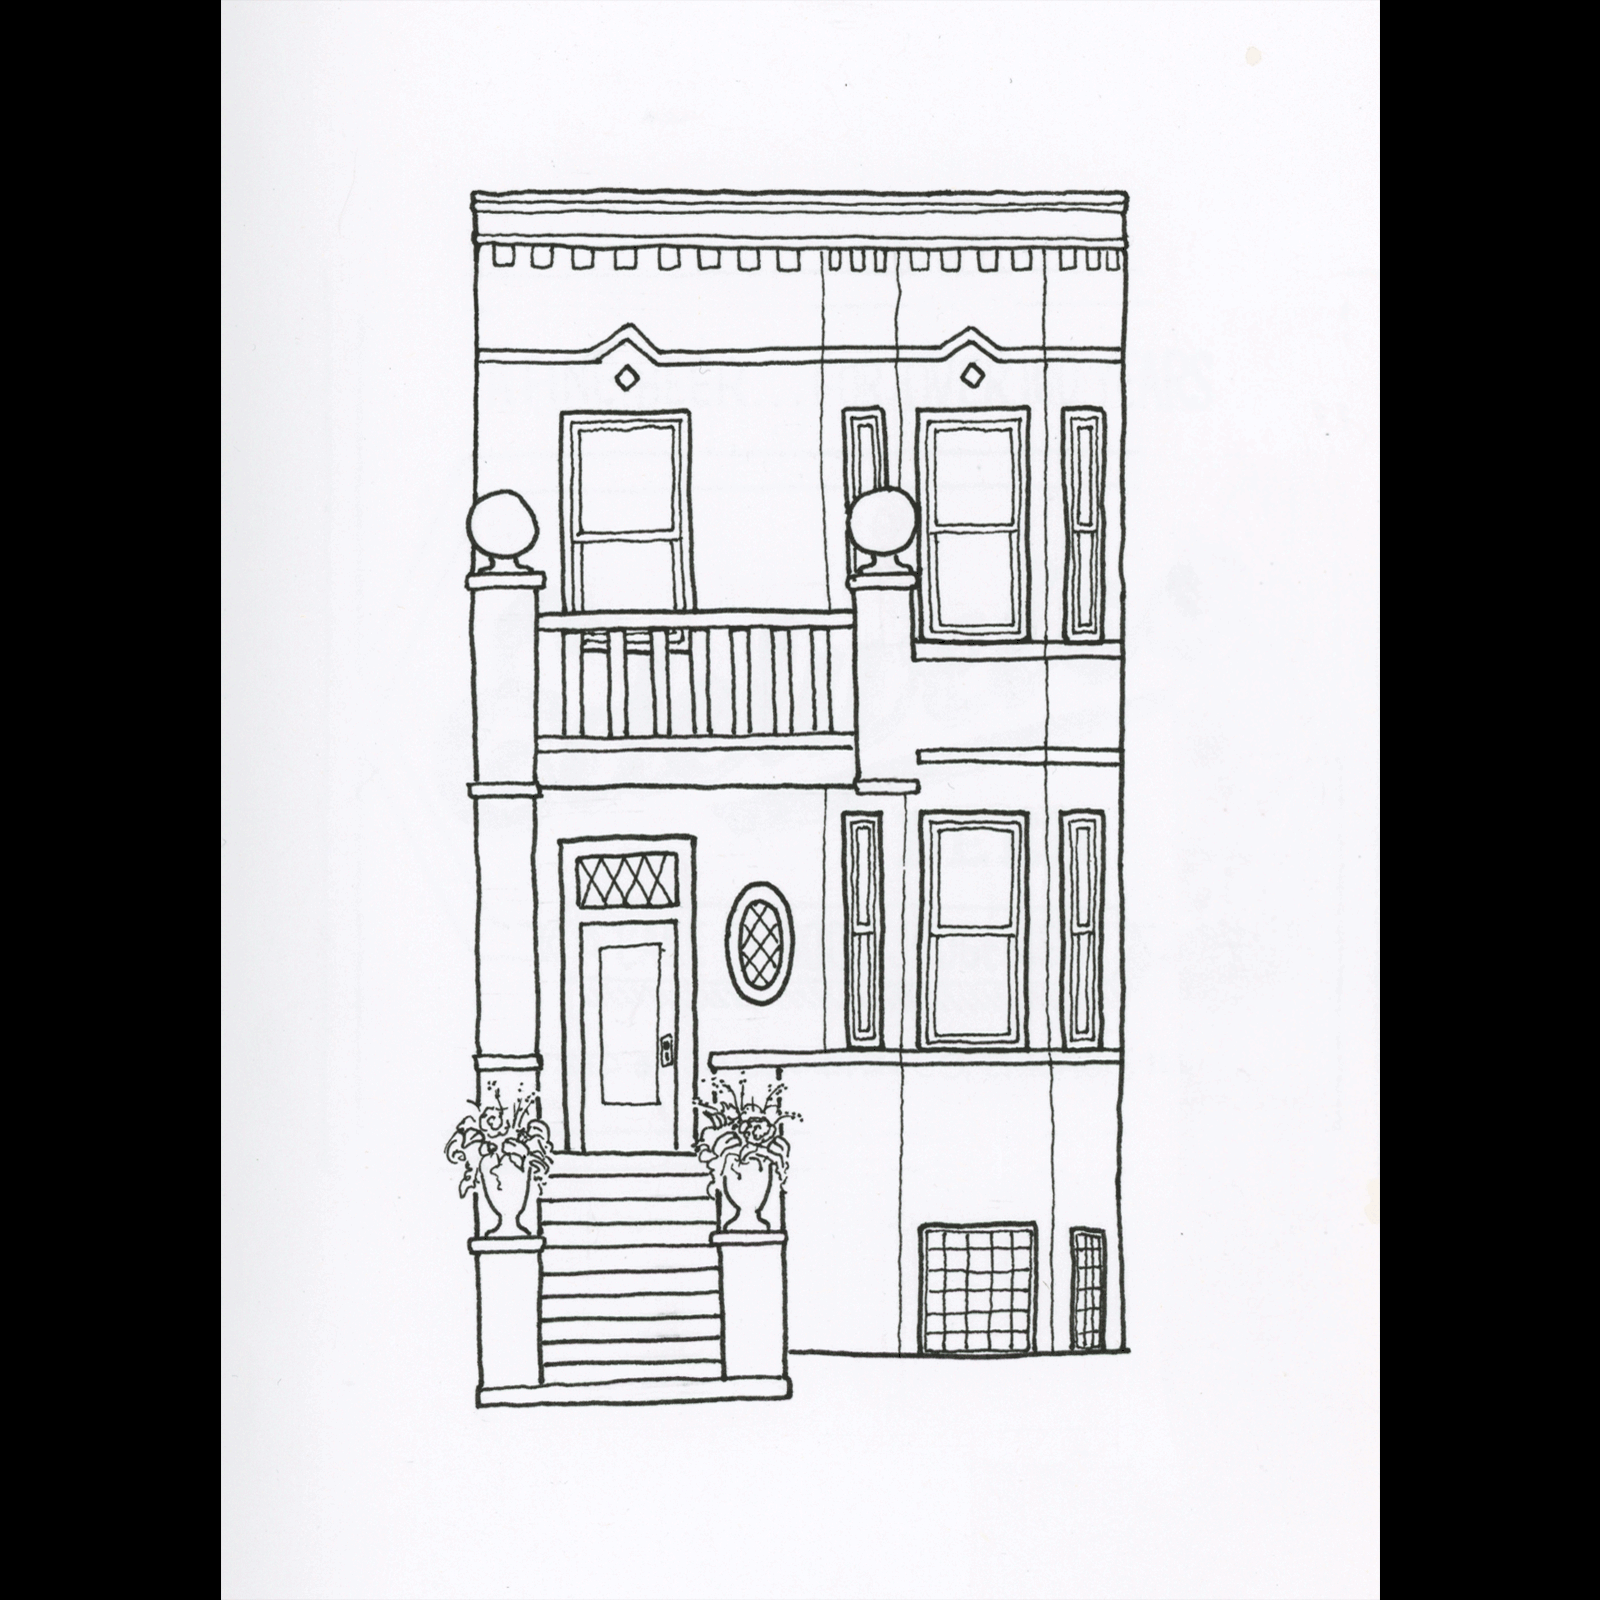 Personal Project: History of Maxwell Street Market. Chicago Two-Flat.